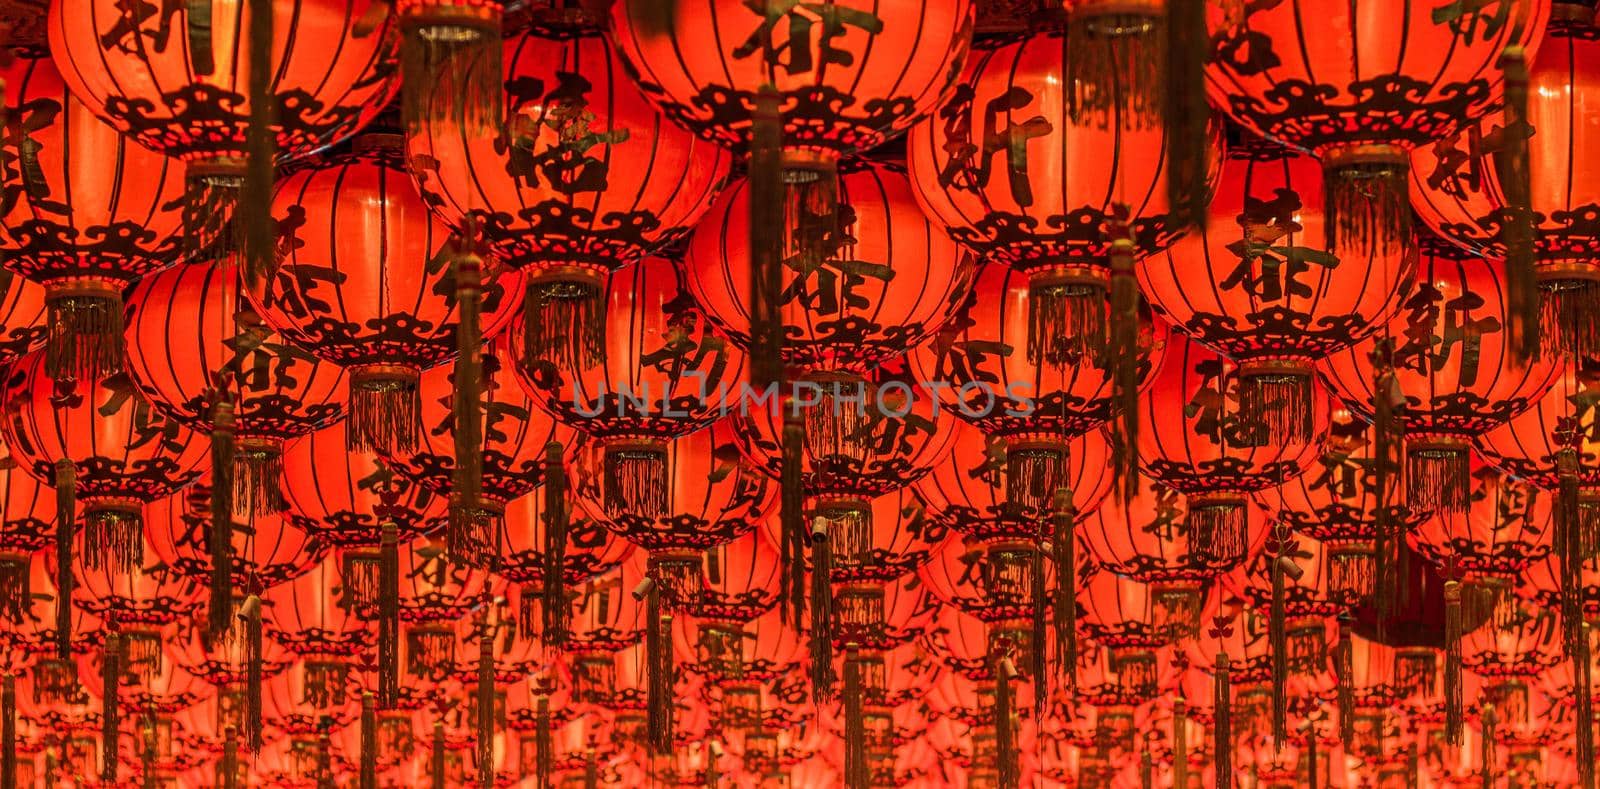 Chinese red lanterns hanging in street at night for decoration. Chinese letter written mean good luck.